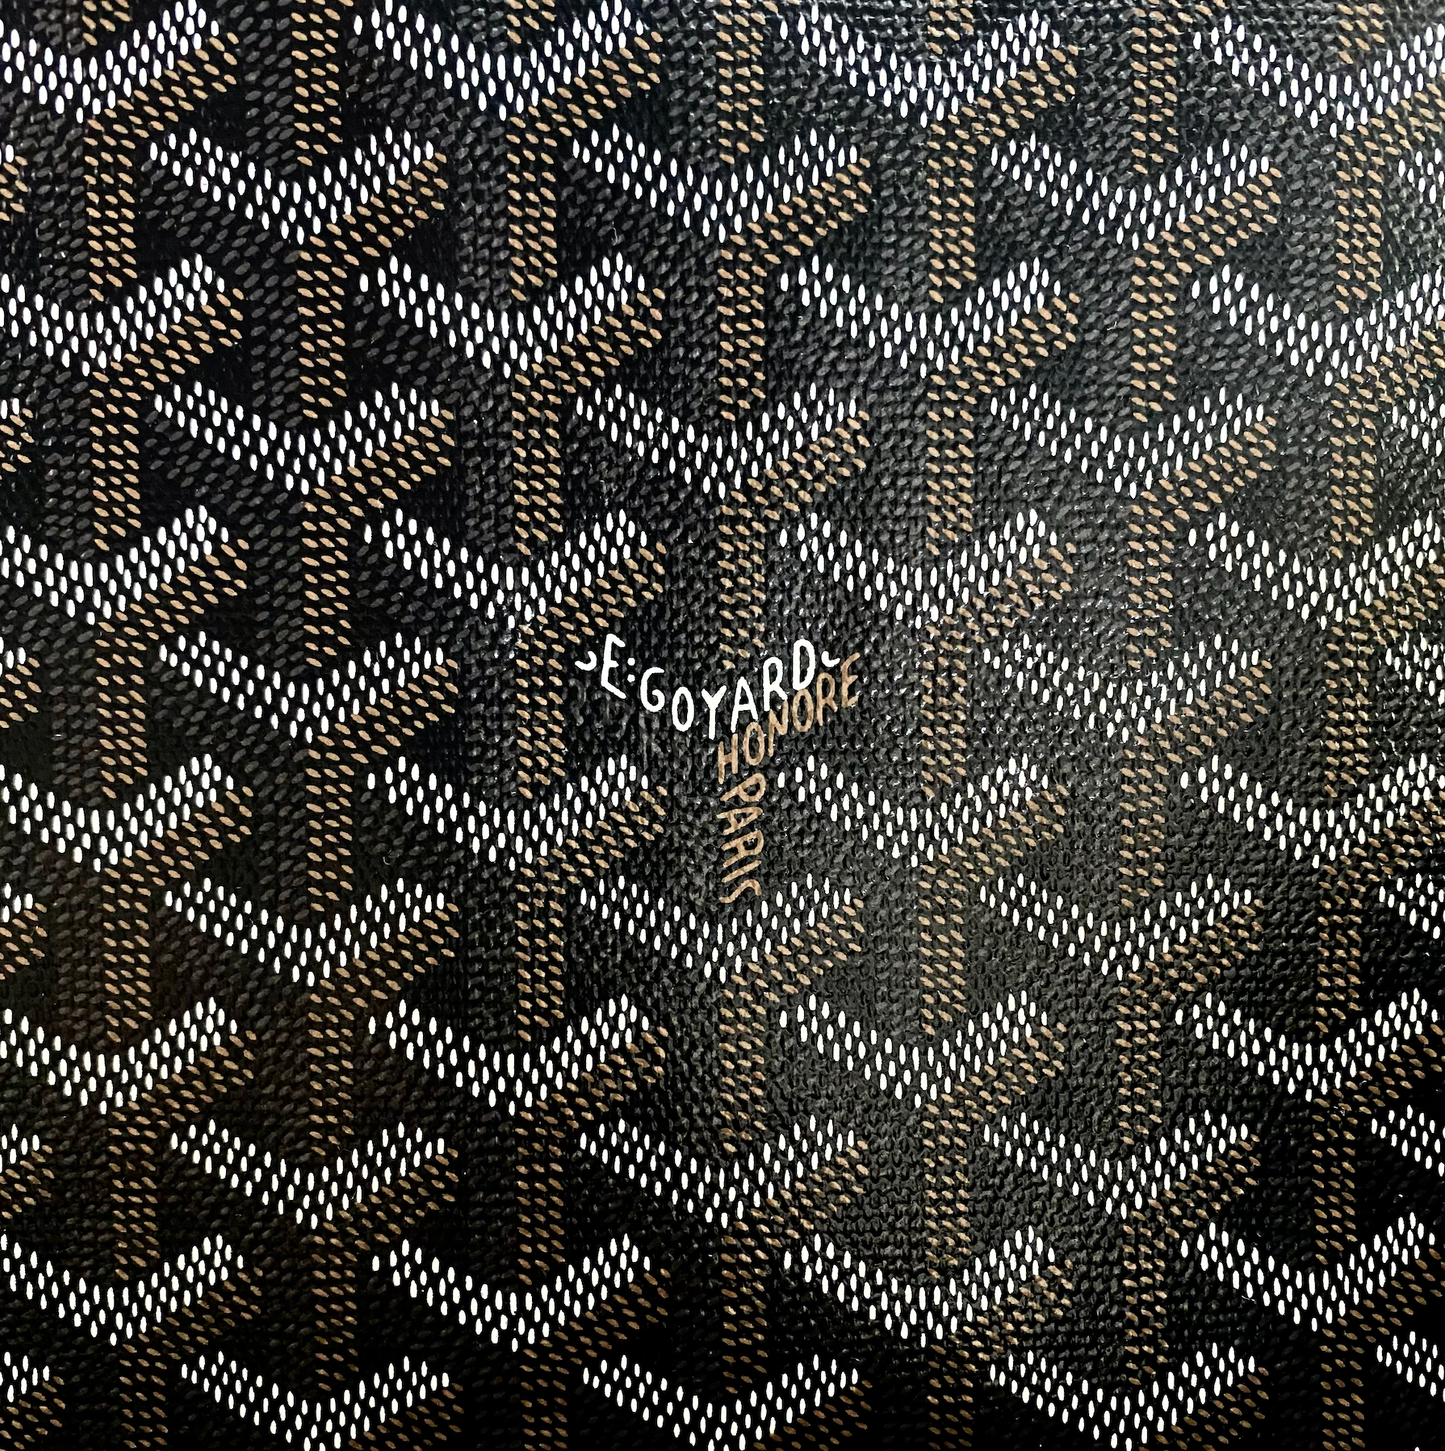 Brown LV vinyl Damier check pattern faux leather fabric by yard –  WendyCustom